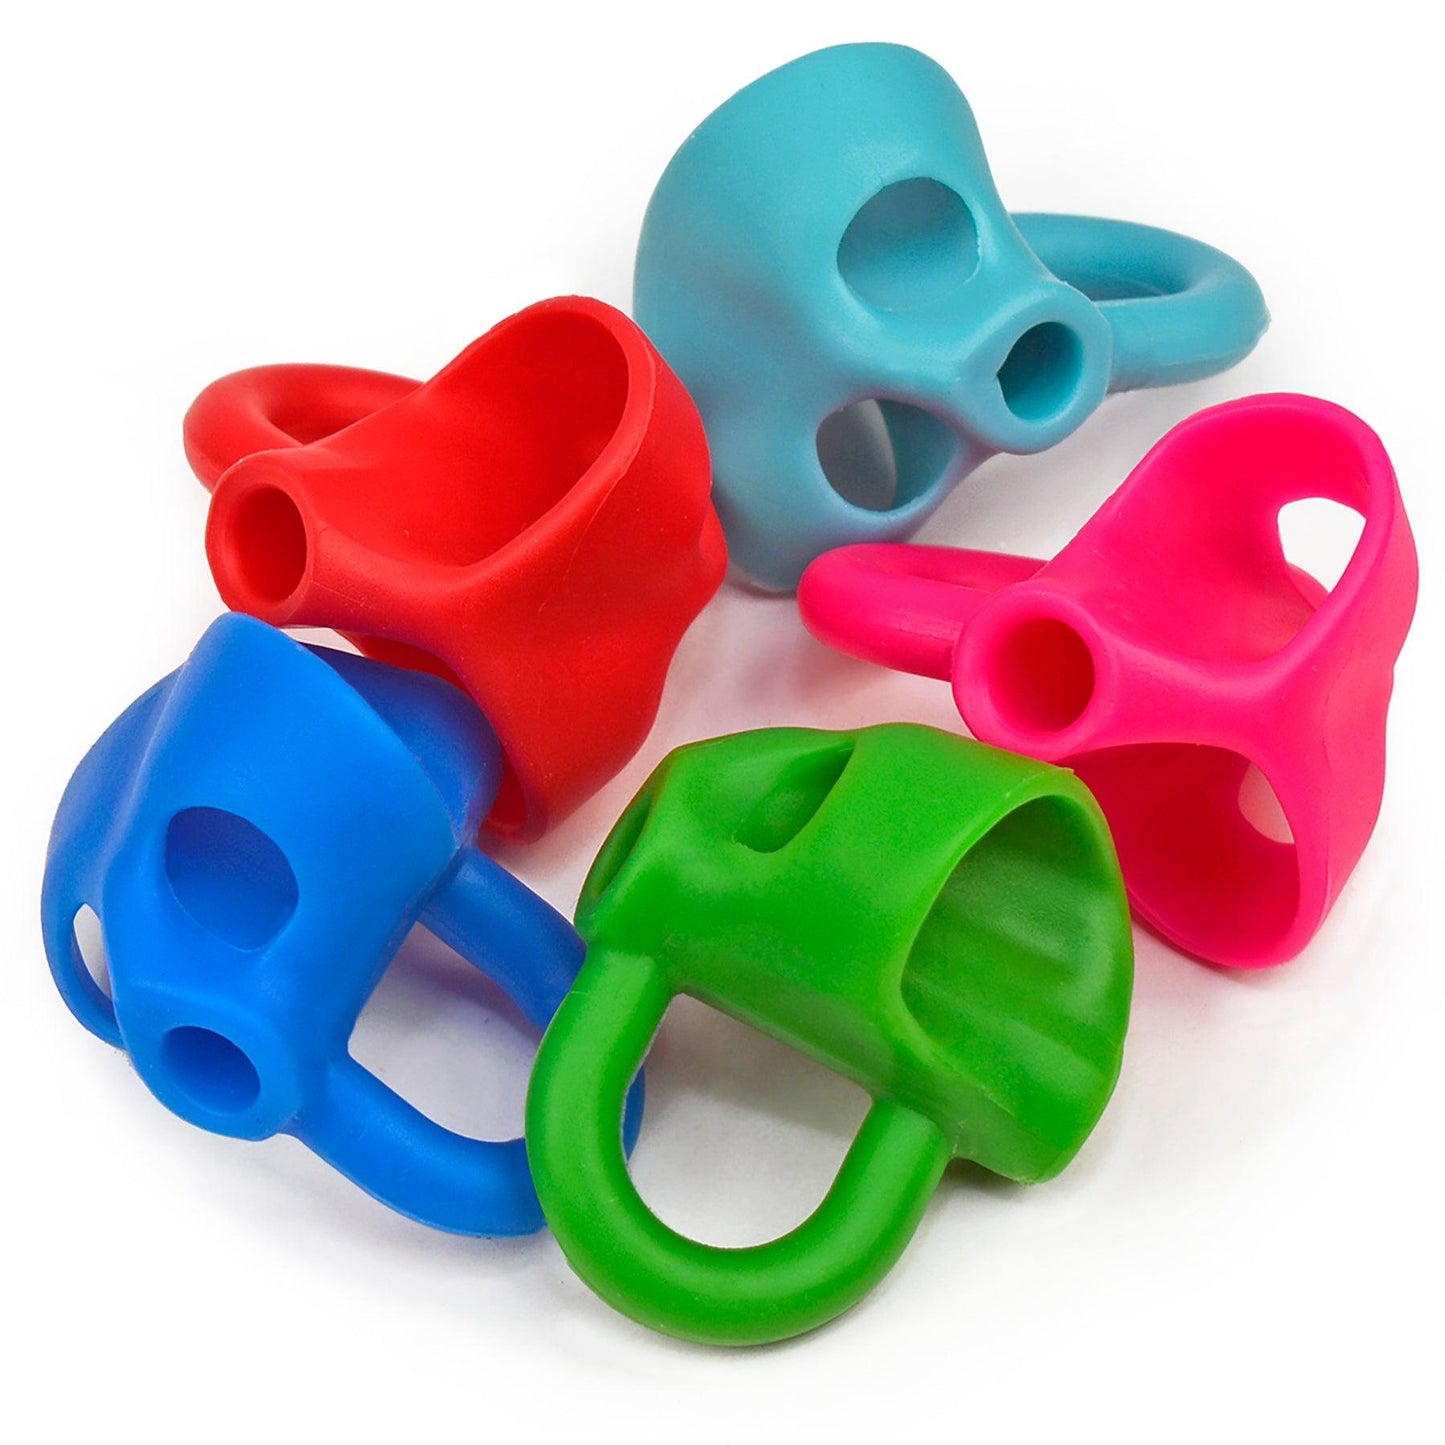 The Ring Grip, Pack of 50 - Loomini